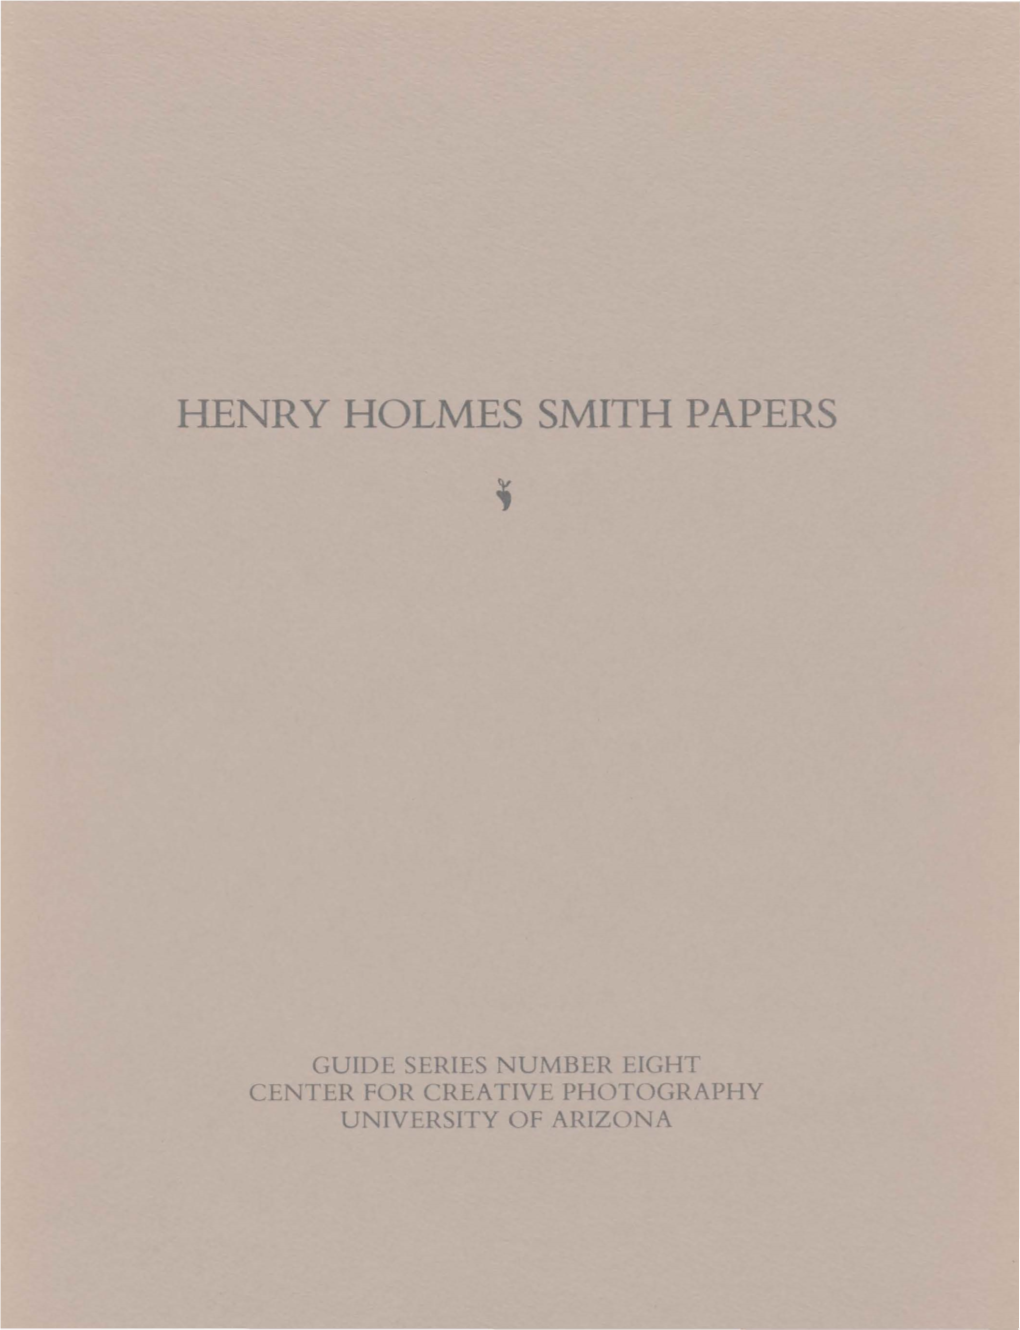 Henry Holmes Smith Papers